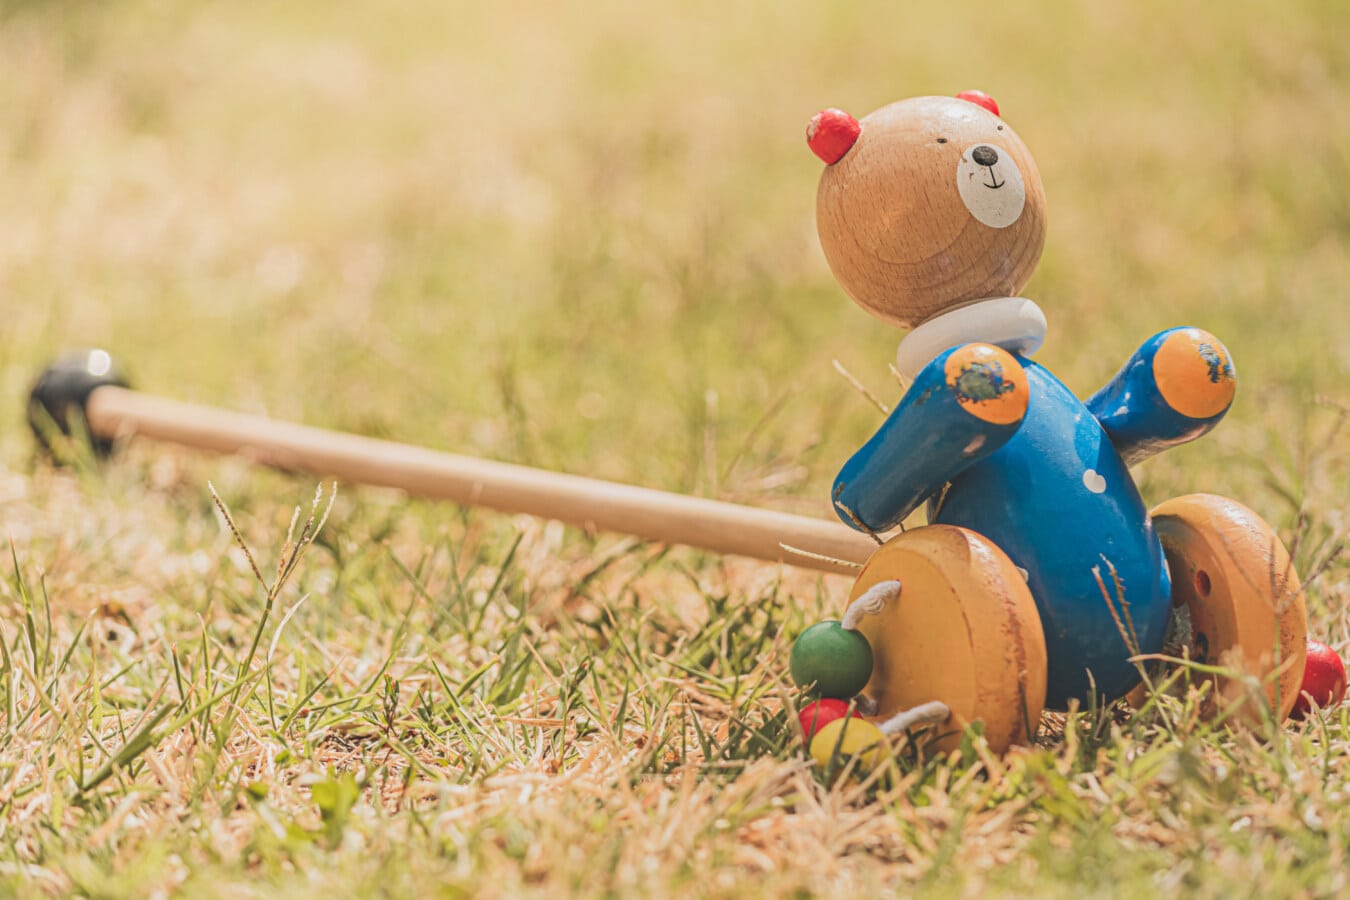 colorful, wooden, bear, toy, handmade, carpentry, grass, field, fun, outdoors